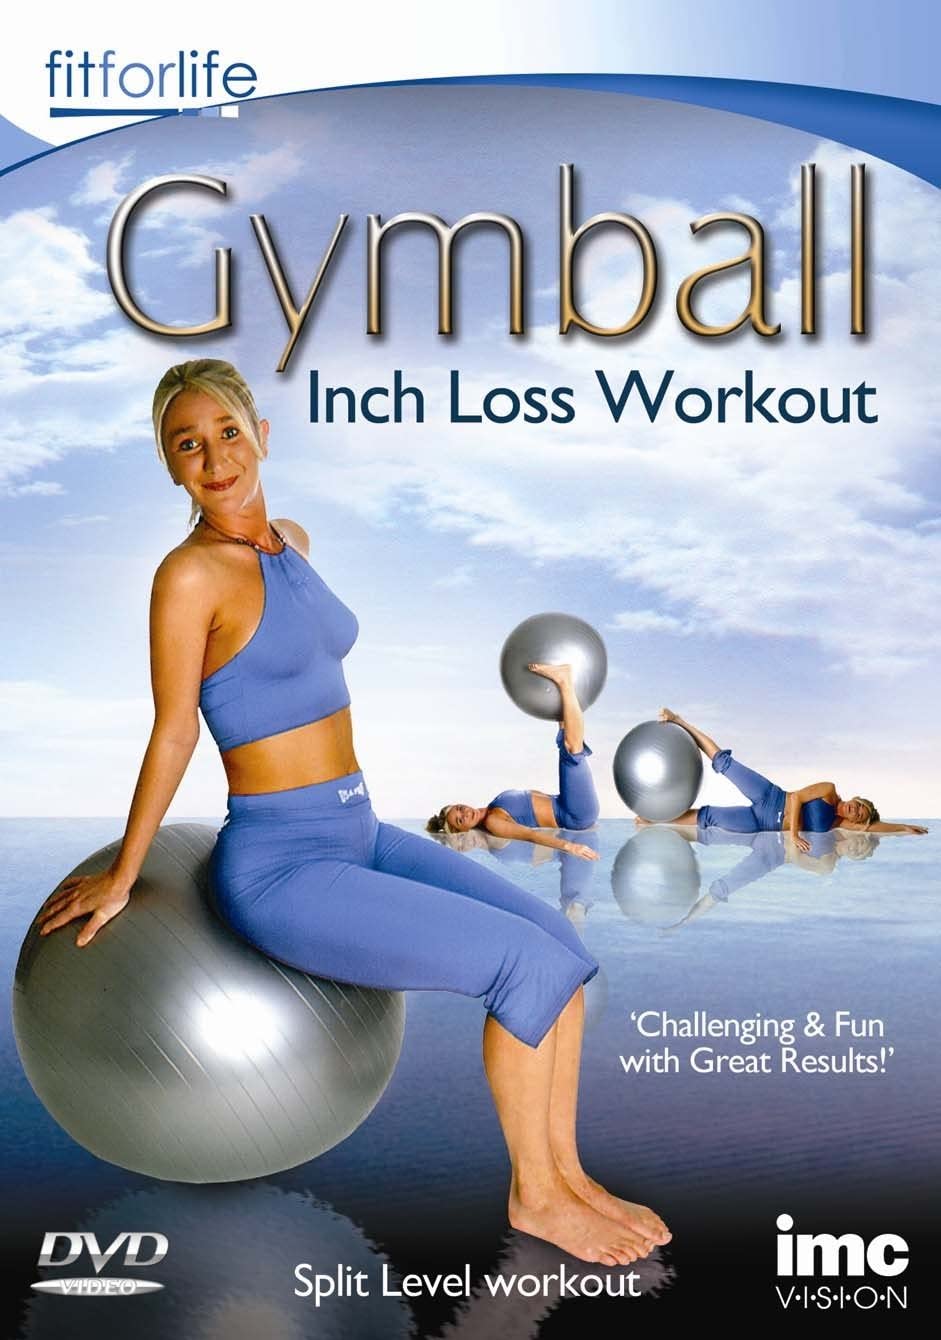 Gymball (Gym Ball) - Inch Loss Workout - Fit For Life Series [DVD]